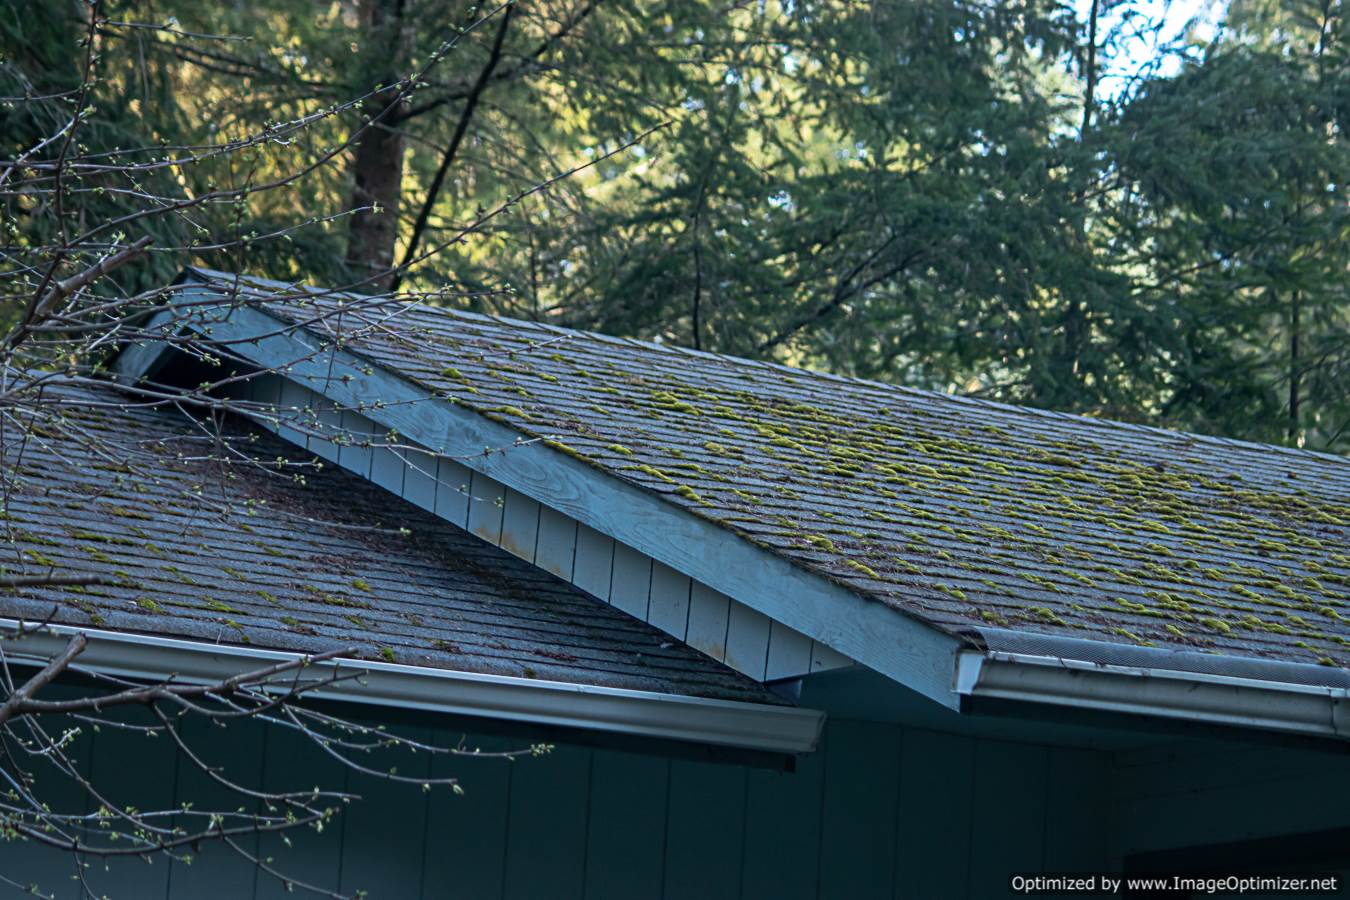 7 Signs the Roof of Your House Needs Repair